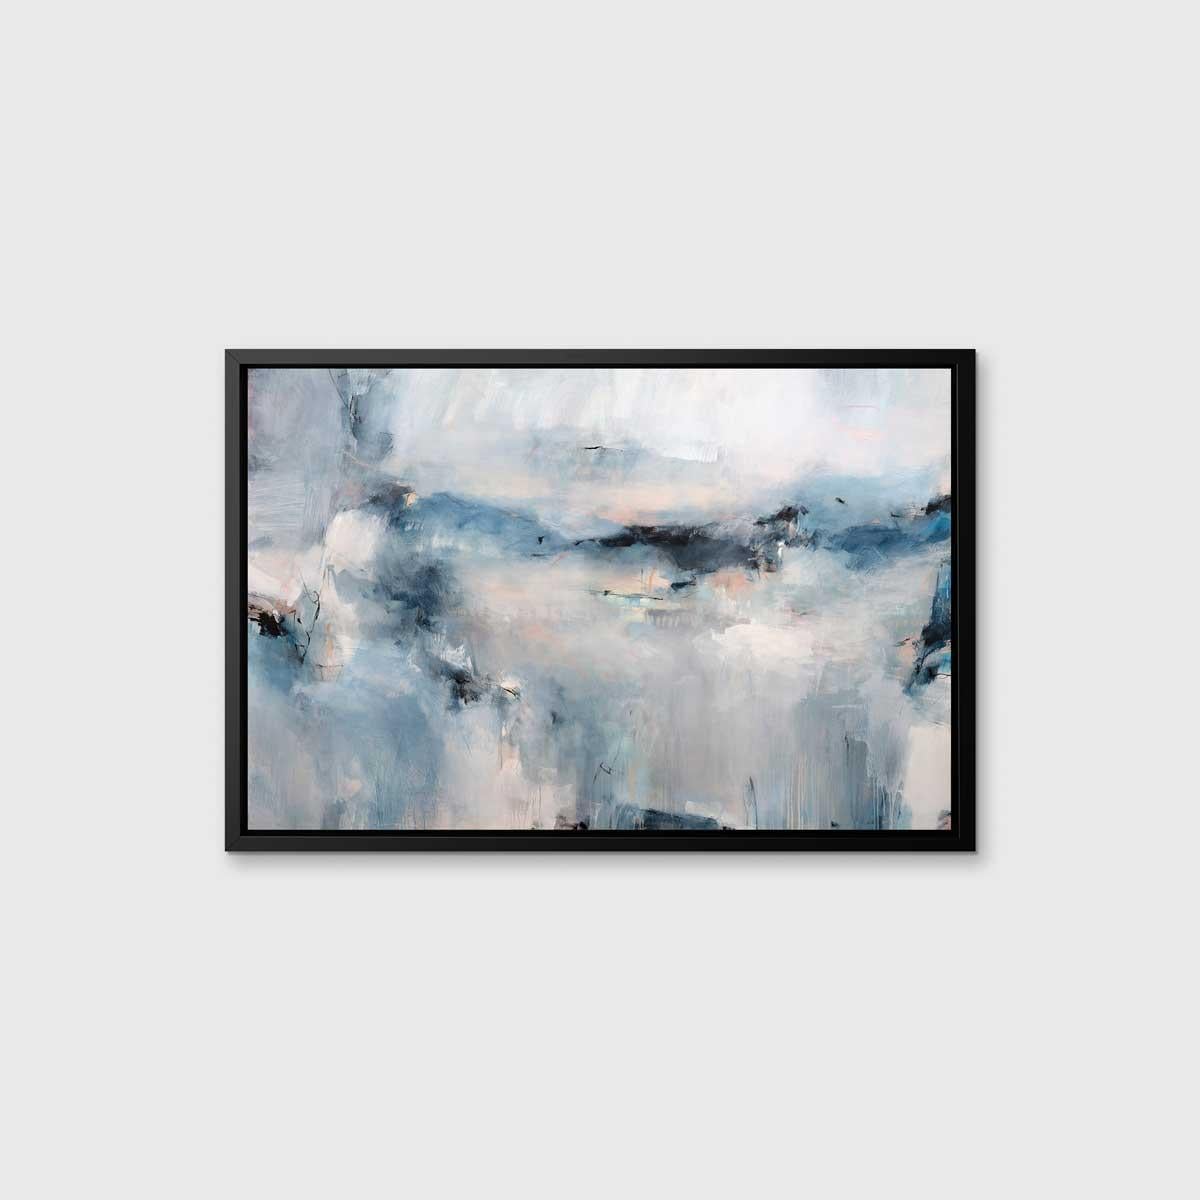 This abstract contemporary Limited Edition giclee print by Kelly Rossetti features a soft palette and blended, but expressive strokes. Cool blue greys are balanced by darker, near black tones and warmer pink and peach colors. This piece, while